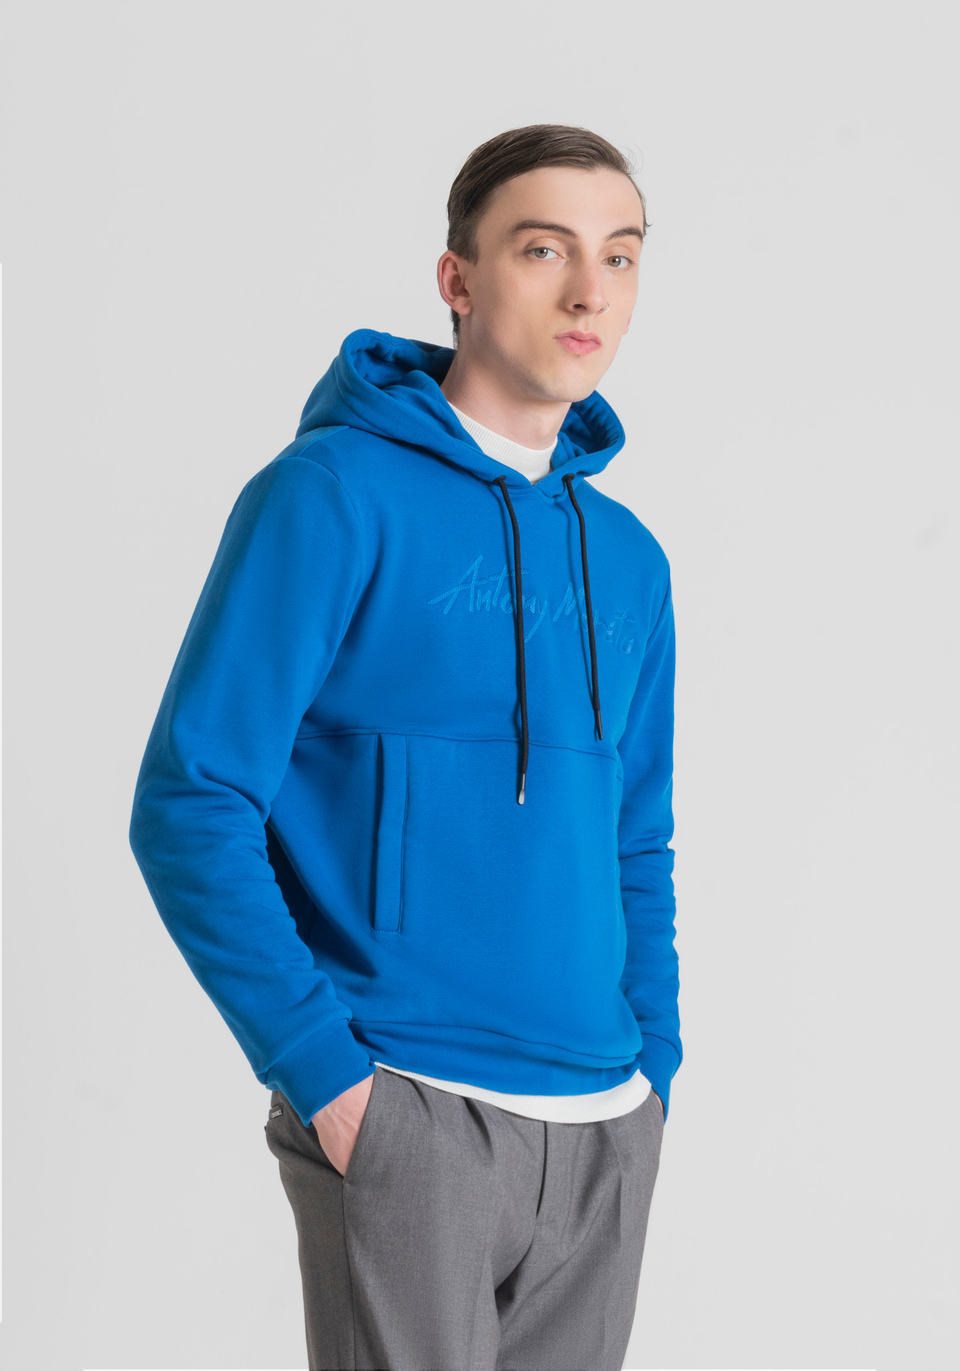 REGULAR-FIT SWEATSHIRT IN STRETCH COTTON-BLEND WITH EMBROIDERED LOGO - Antony Morato Online Shop